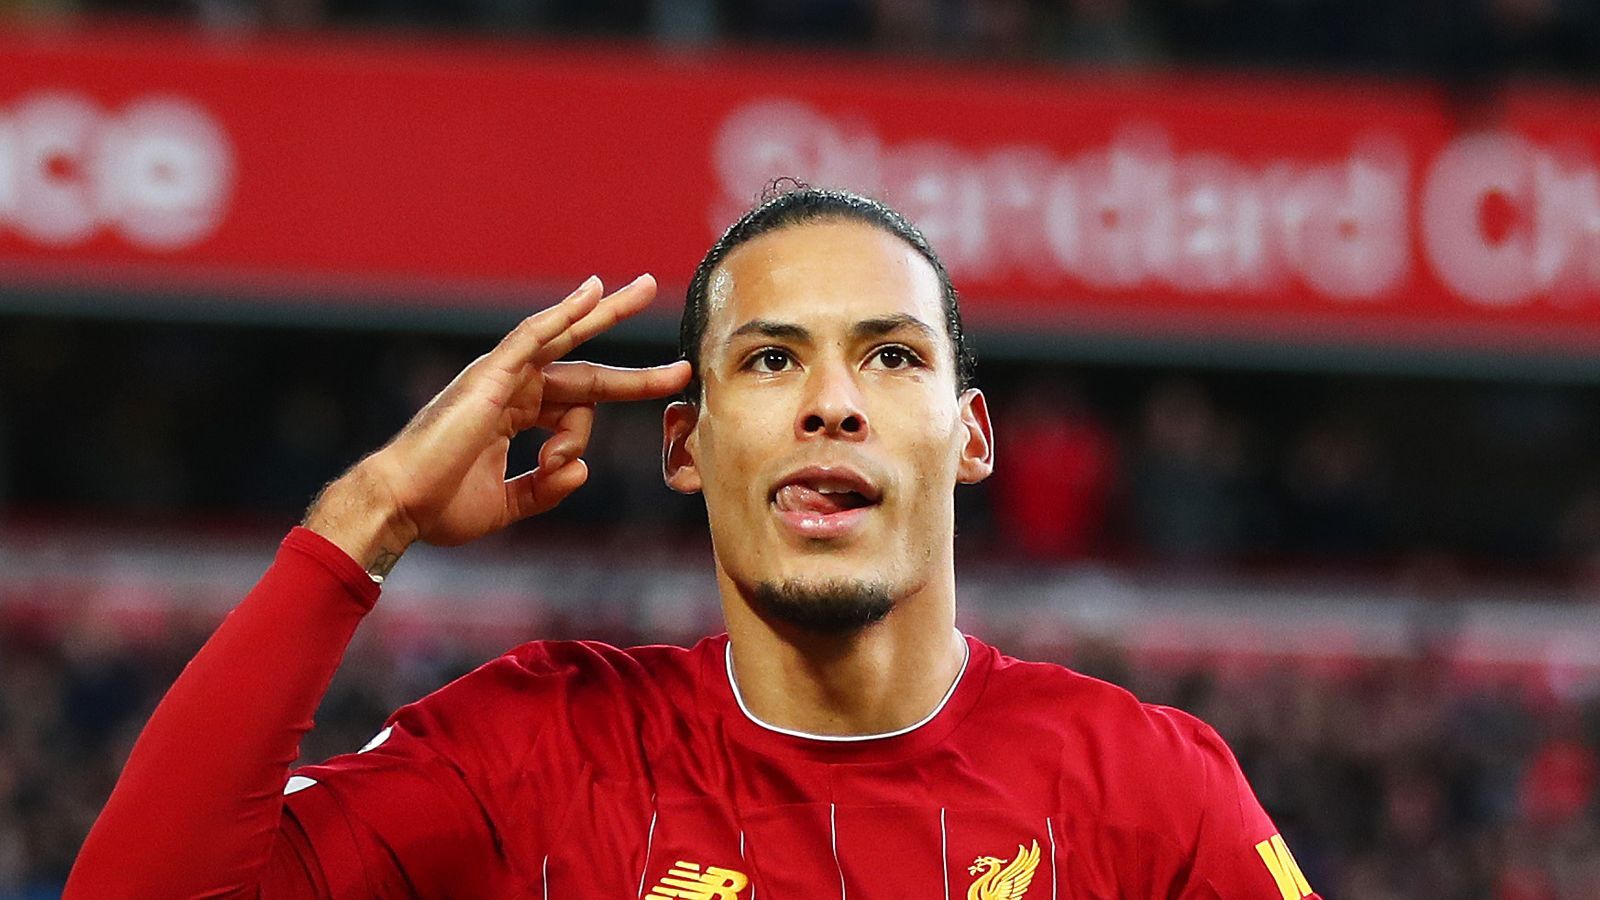 Richarlison faces Virgil van Dijk who is considered by many to be the best in the world  